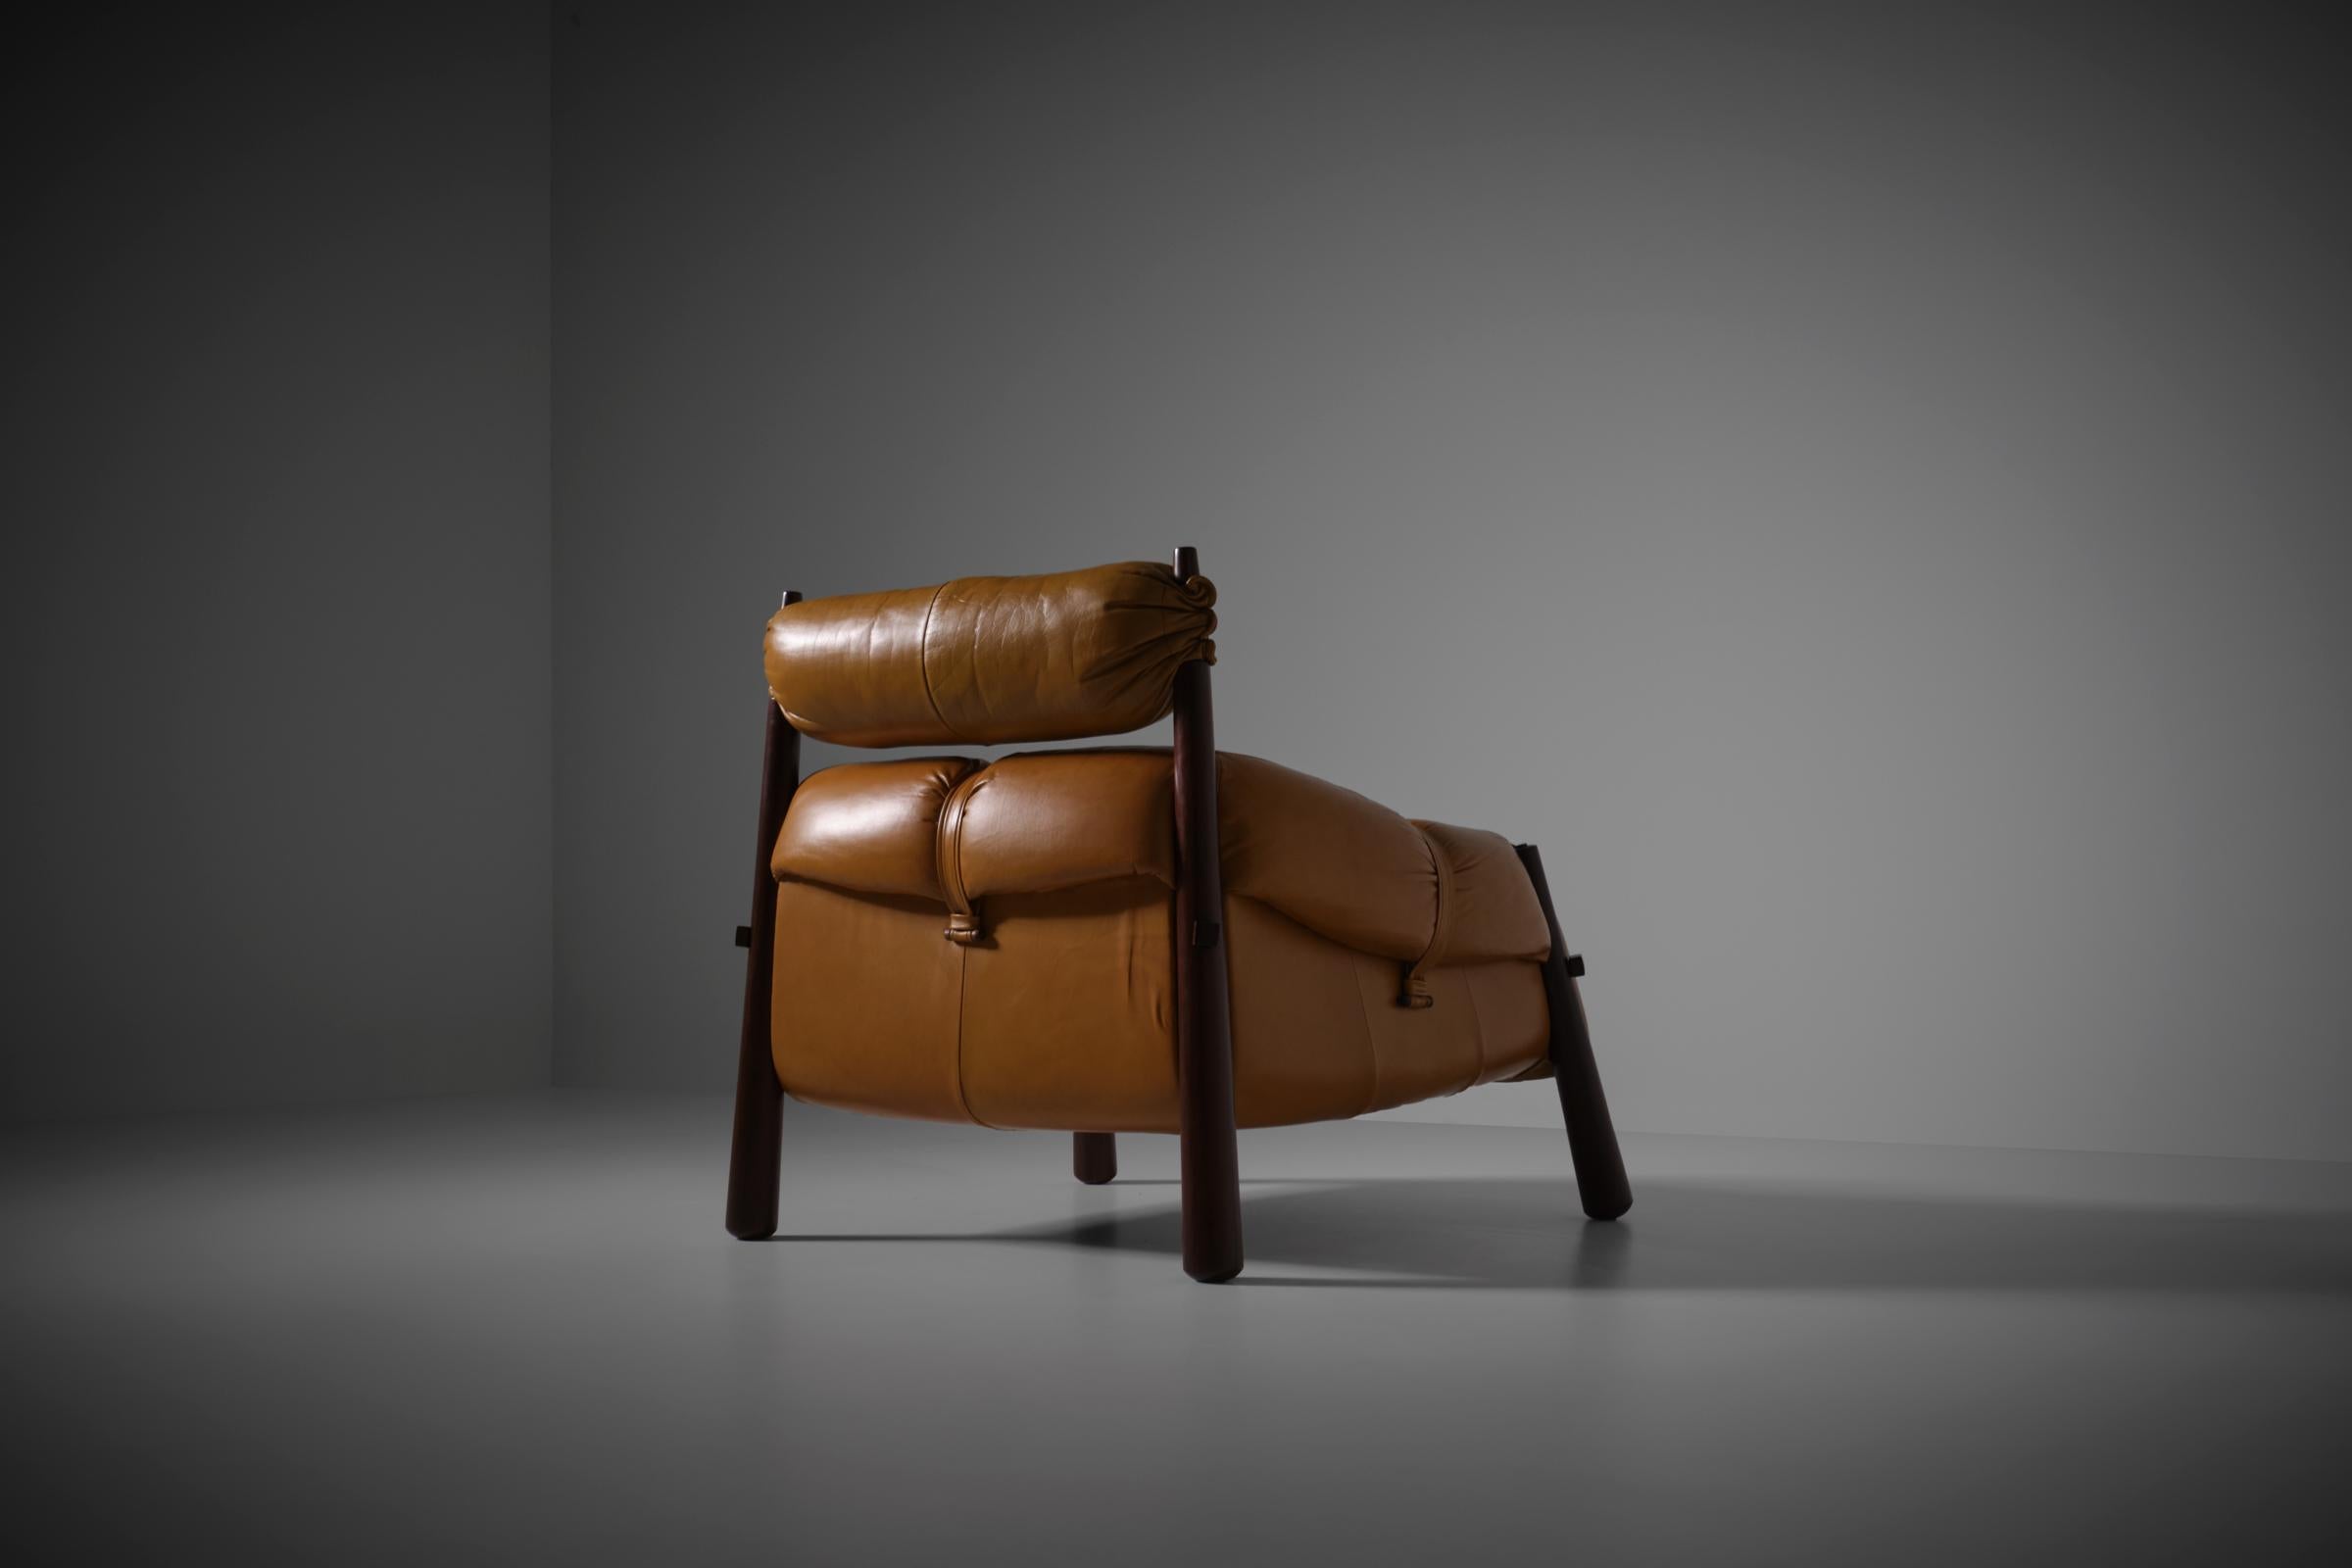 Wood Percival Lafer ‘MP-81’ Lounge chair in original leather, Brazil 1970s